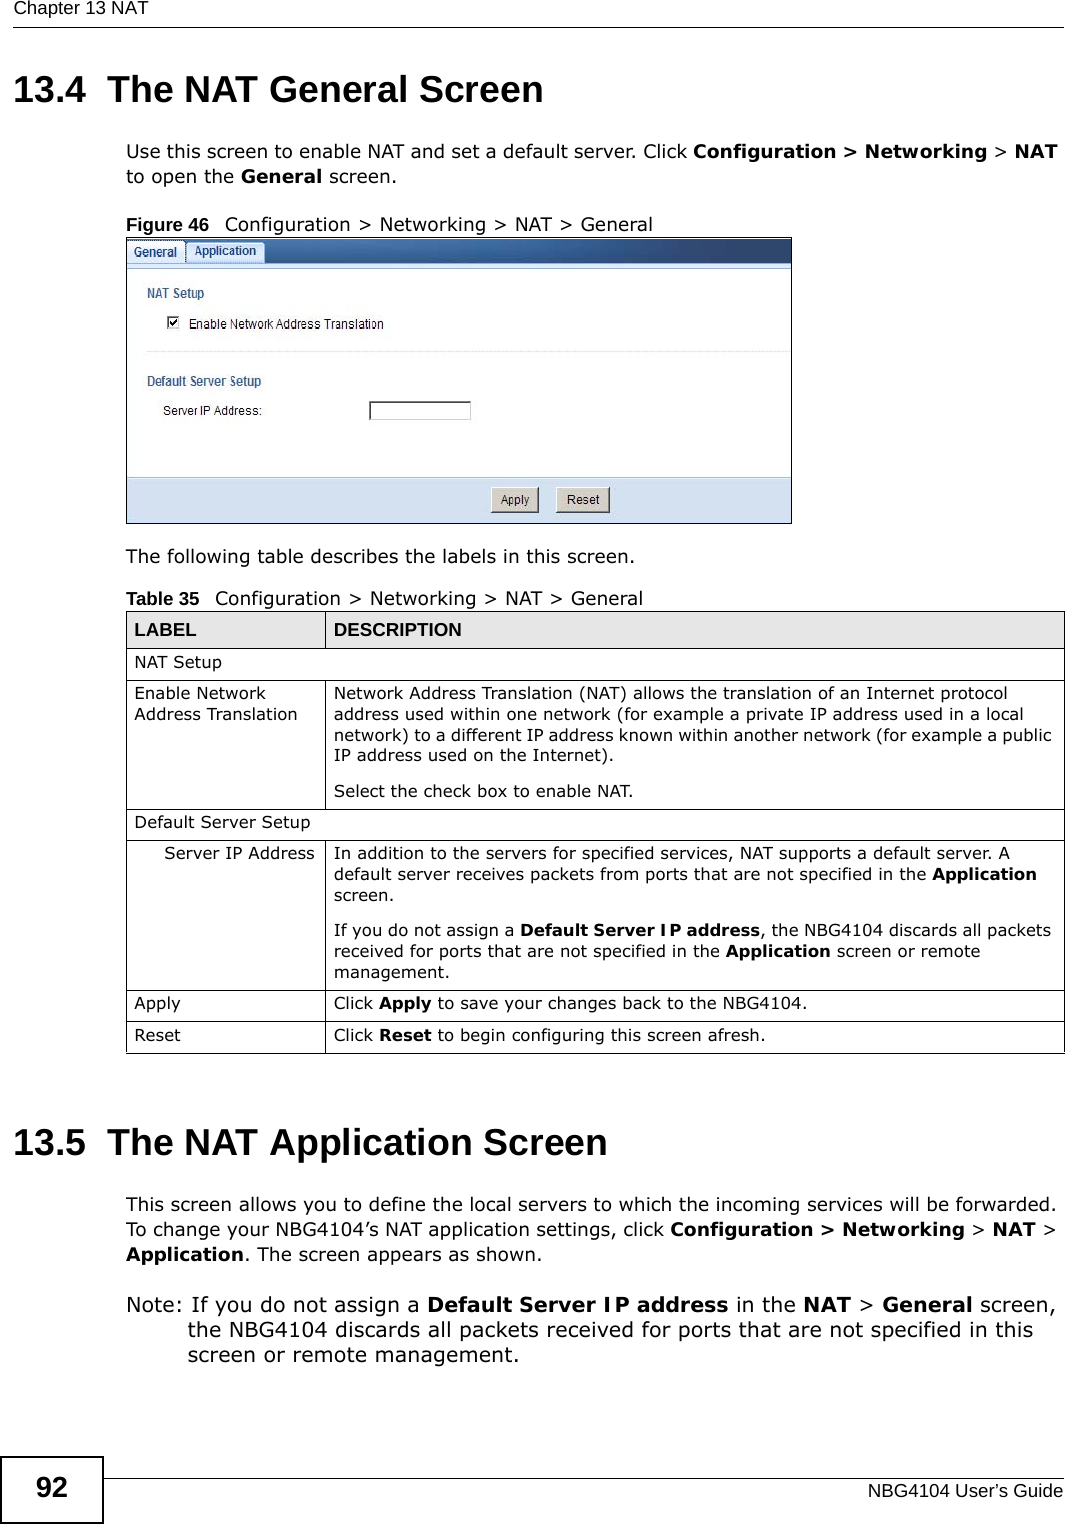 Chapter 13 NATNBG4104 User’s Guide9213.4  The NAT General ScreenUse this screen to enable NAT and set a default server. Click Configuration &gt; Networking &gt; NAT to open the General screen.Figure 46   Configuration &gt; Networking &gt; NAT &gt; General The following table describes the labels in this screen.13.5  The NAT Application Screen   This screen allows you to define the local servers to which the incoming services will be forwarded. To change your NBG4104’s NAT application settings, click Configuration &gt; Networking &gt; NAT &gt; Application. The screen appears as shown.Note: If you do not assign a Default Server IP address in the NAT &gt; General screen, the NBG4104 discards all packets received for ports that are not specified in this screen or remote management.Table 35   Configuration &gt; Networking &gt; NAT &gt; GeneralLABEL DESCRIPTIONNAT SetupEnable Network Address TranslationNetwork Address Translation (NAT) allows the translation of an Internet protocol address used within one network (for example a private IP address used in a local network) to a different IP address known within another network (for example a public IP address used on the Internet). Select the check box to enable NAT.Default Server SetupServer IP Address In addition to the servers for specified services, NAT supports a default server. A default server receives packets from ports that are not specified in the Application screen. If you do not assign a Default Server IP address, the NBG4104 discards all packets received for ports that are not specified in the Application screen or remote management.Apply Click Apply to save your changes back to the NBG4104.Reset Click Reset to begin configuring this screen afresh.